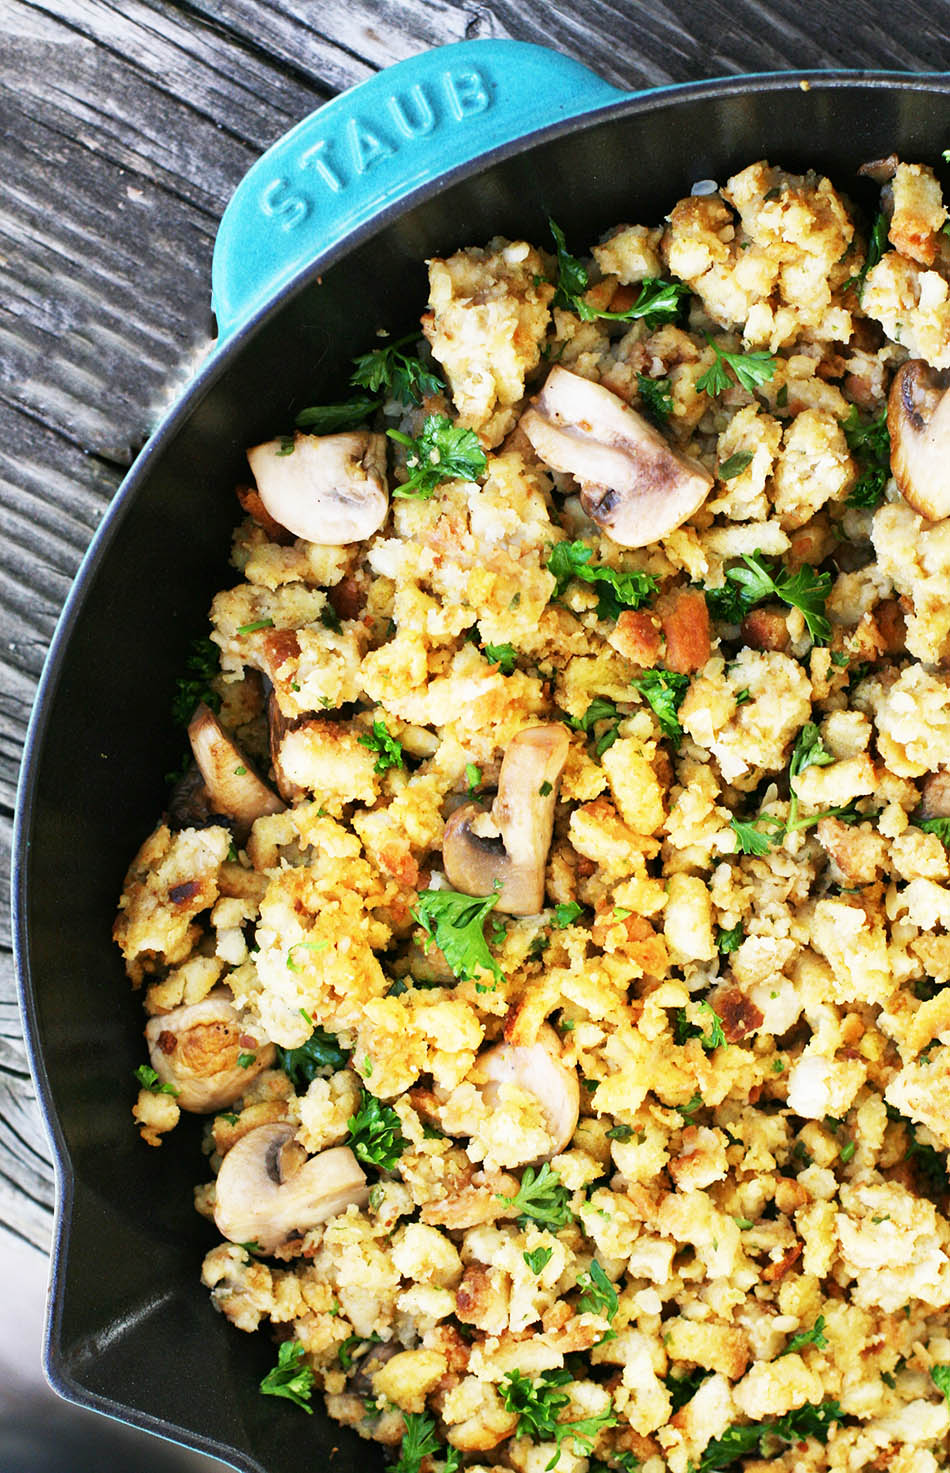 How to doctor up boxed stuffing: Make this herb and mushroom stuffing with two simple add-ins.